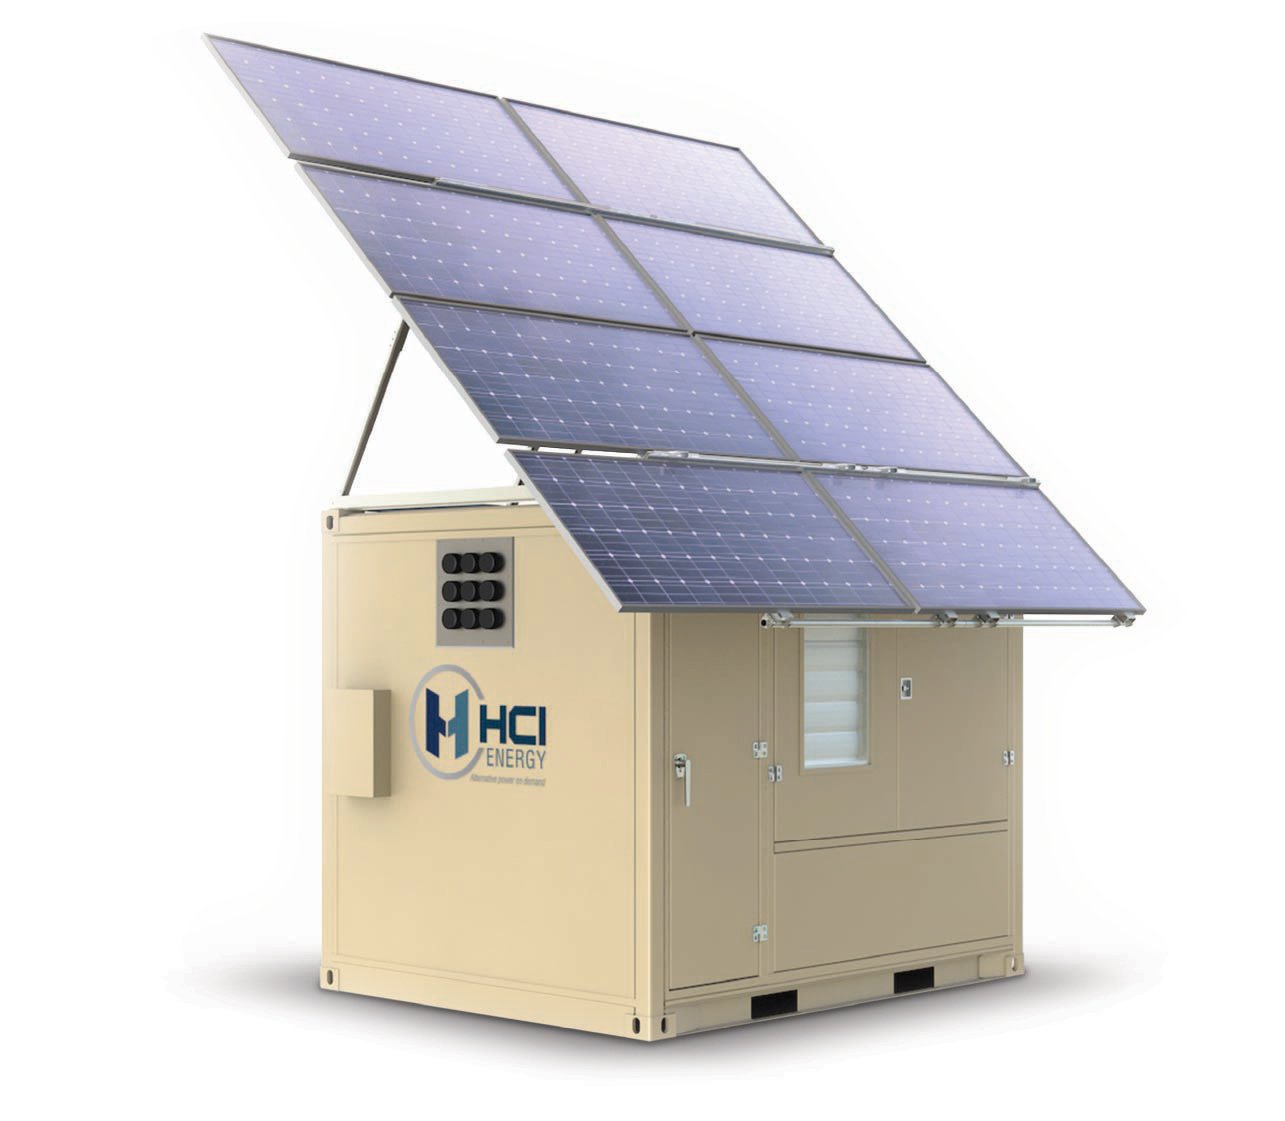 Content_HCI-Energy-Hybrid-Power-Shelter-Products-Page